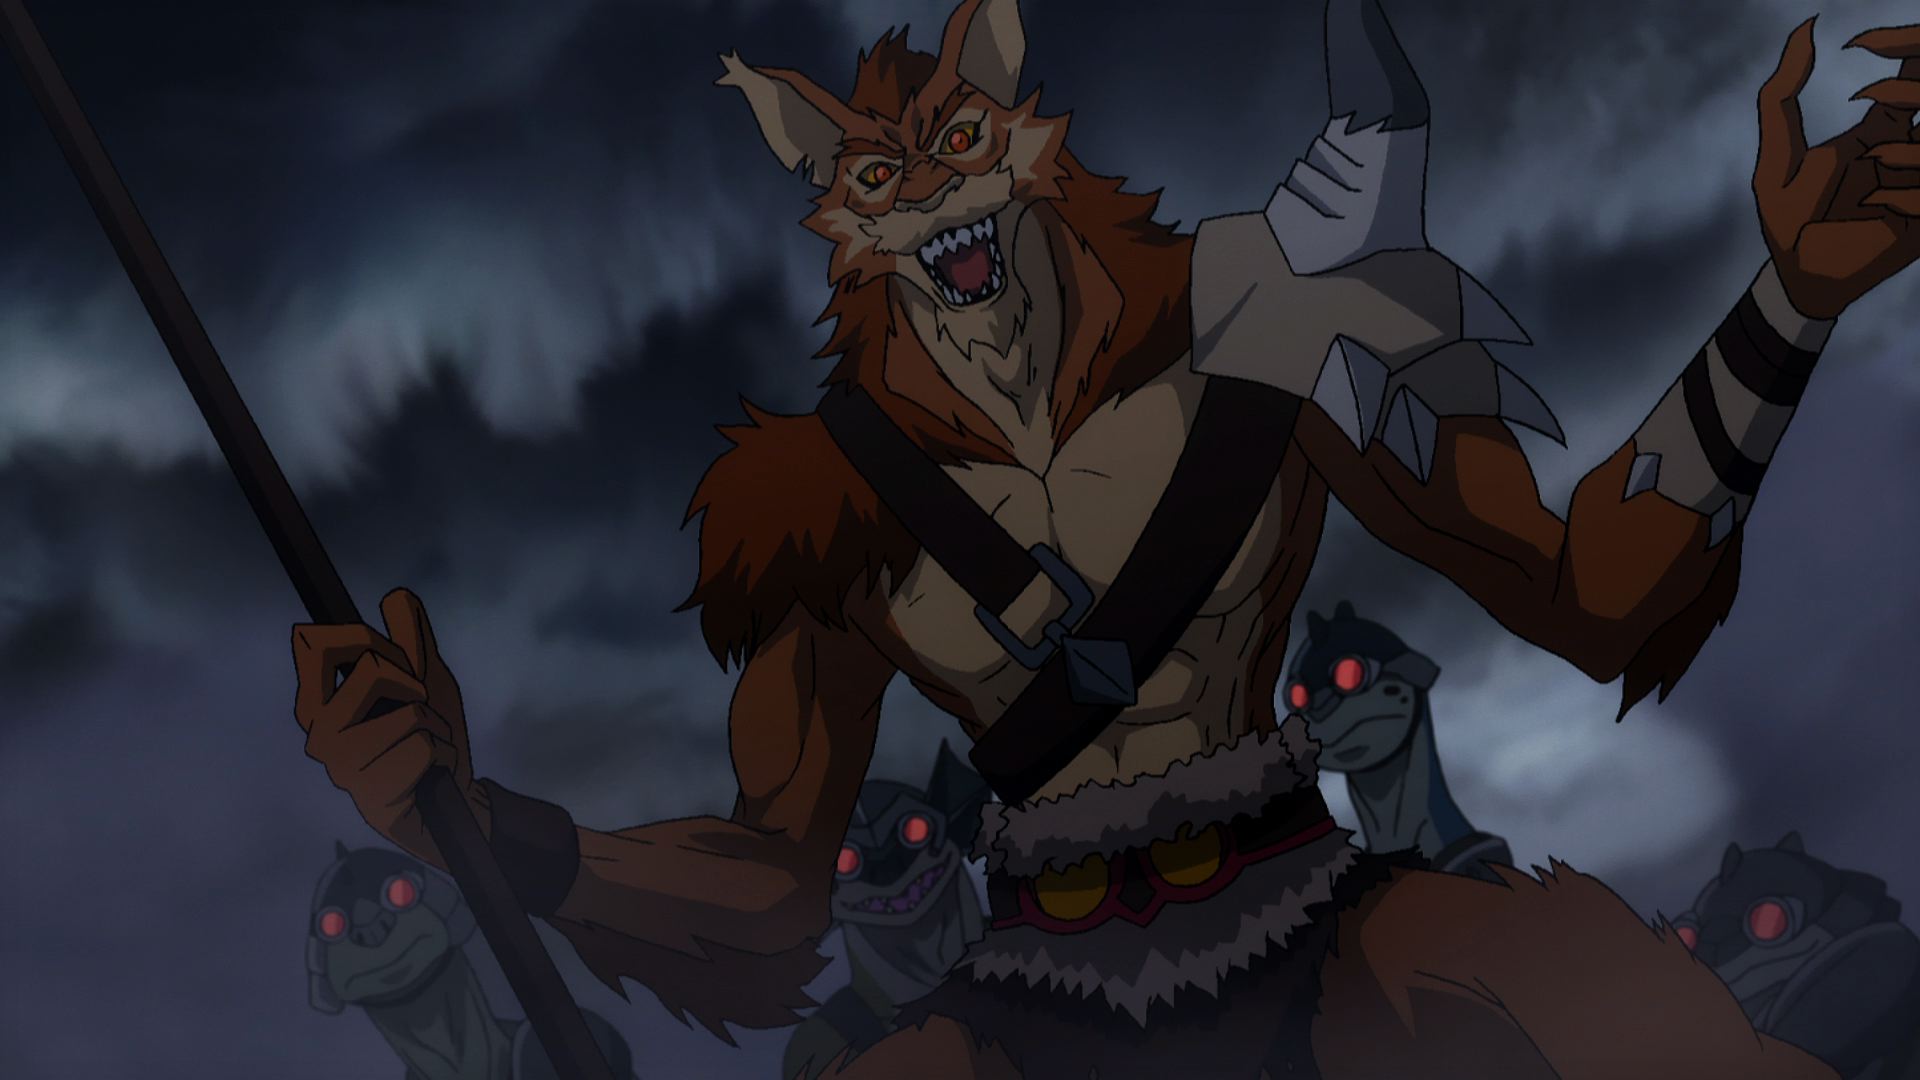 Thundercats Episode 13 Clips and Preview Pics - Thundercats.ws